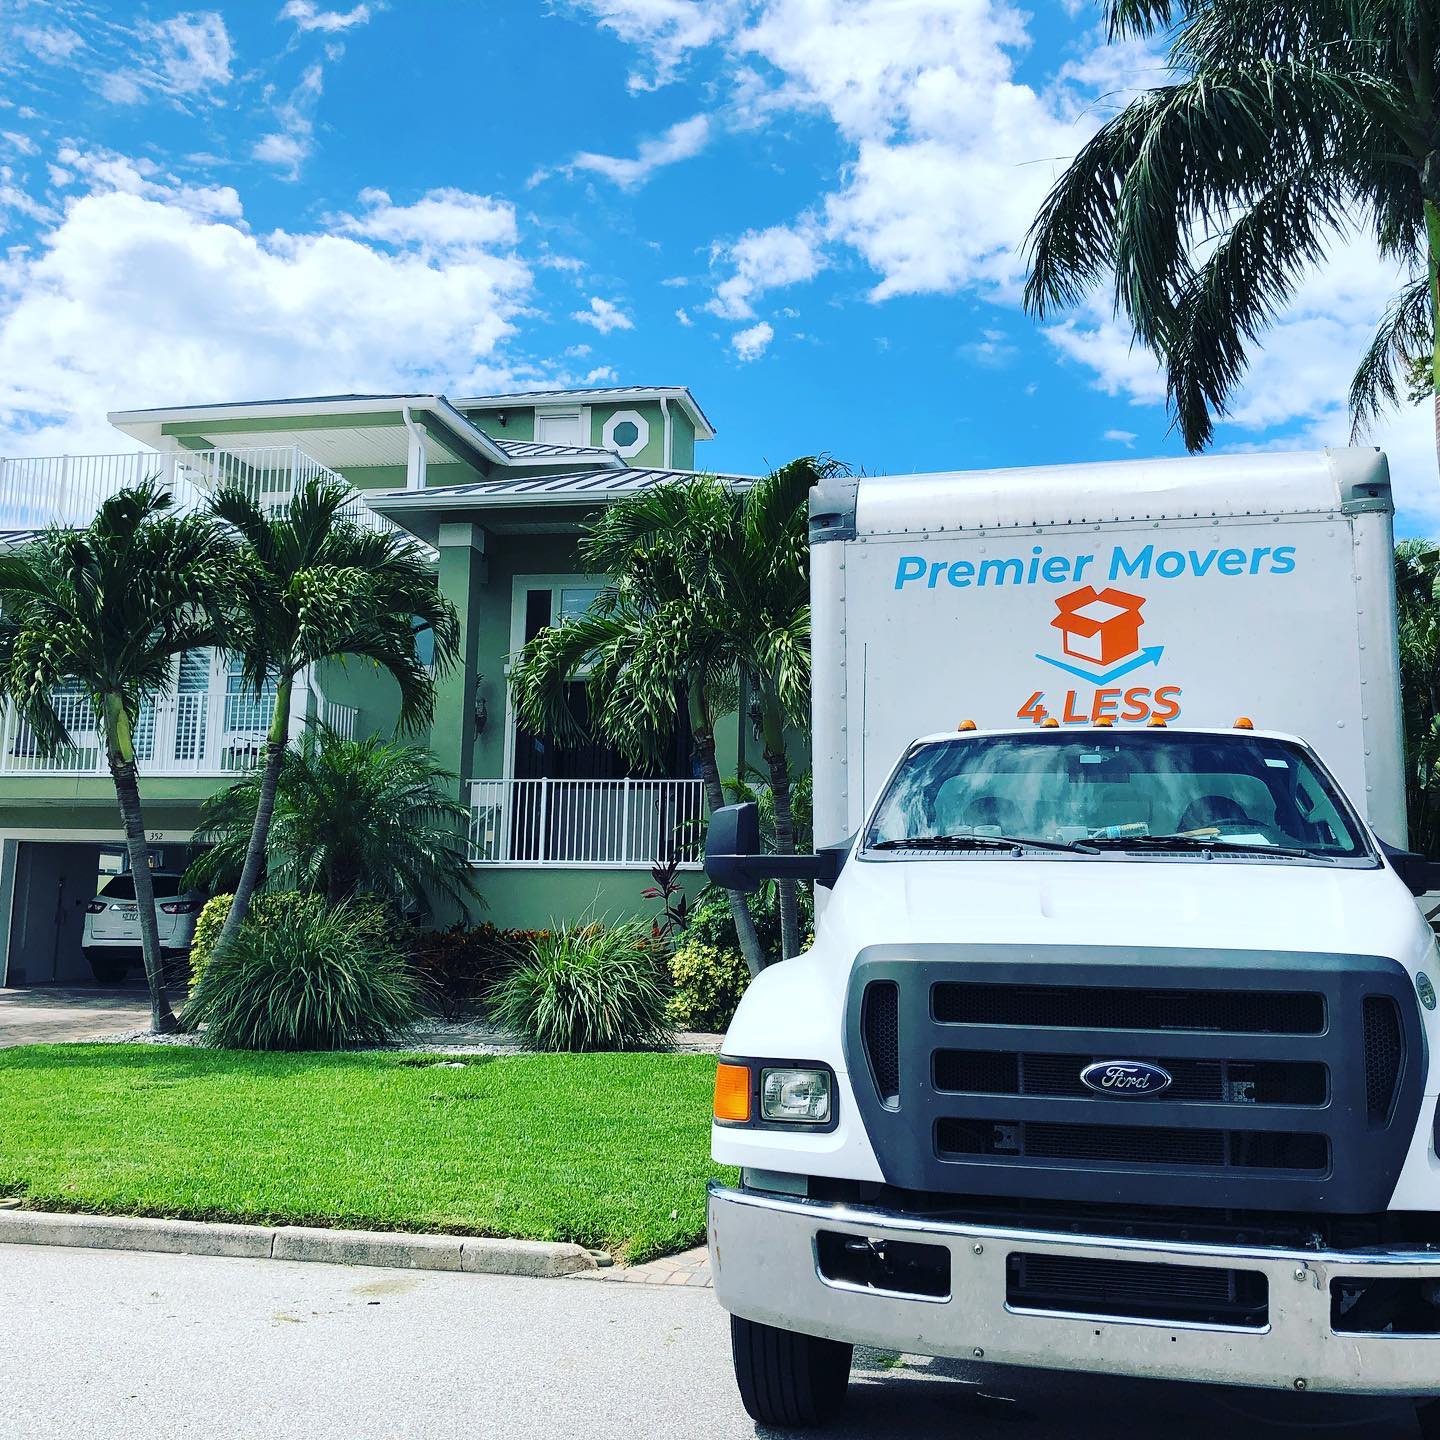 Premier Movers 4 Less Tampa Best Moving Company in Tampa